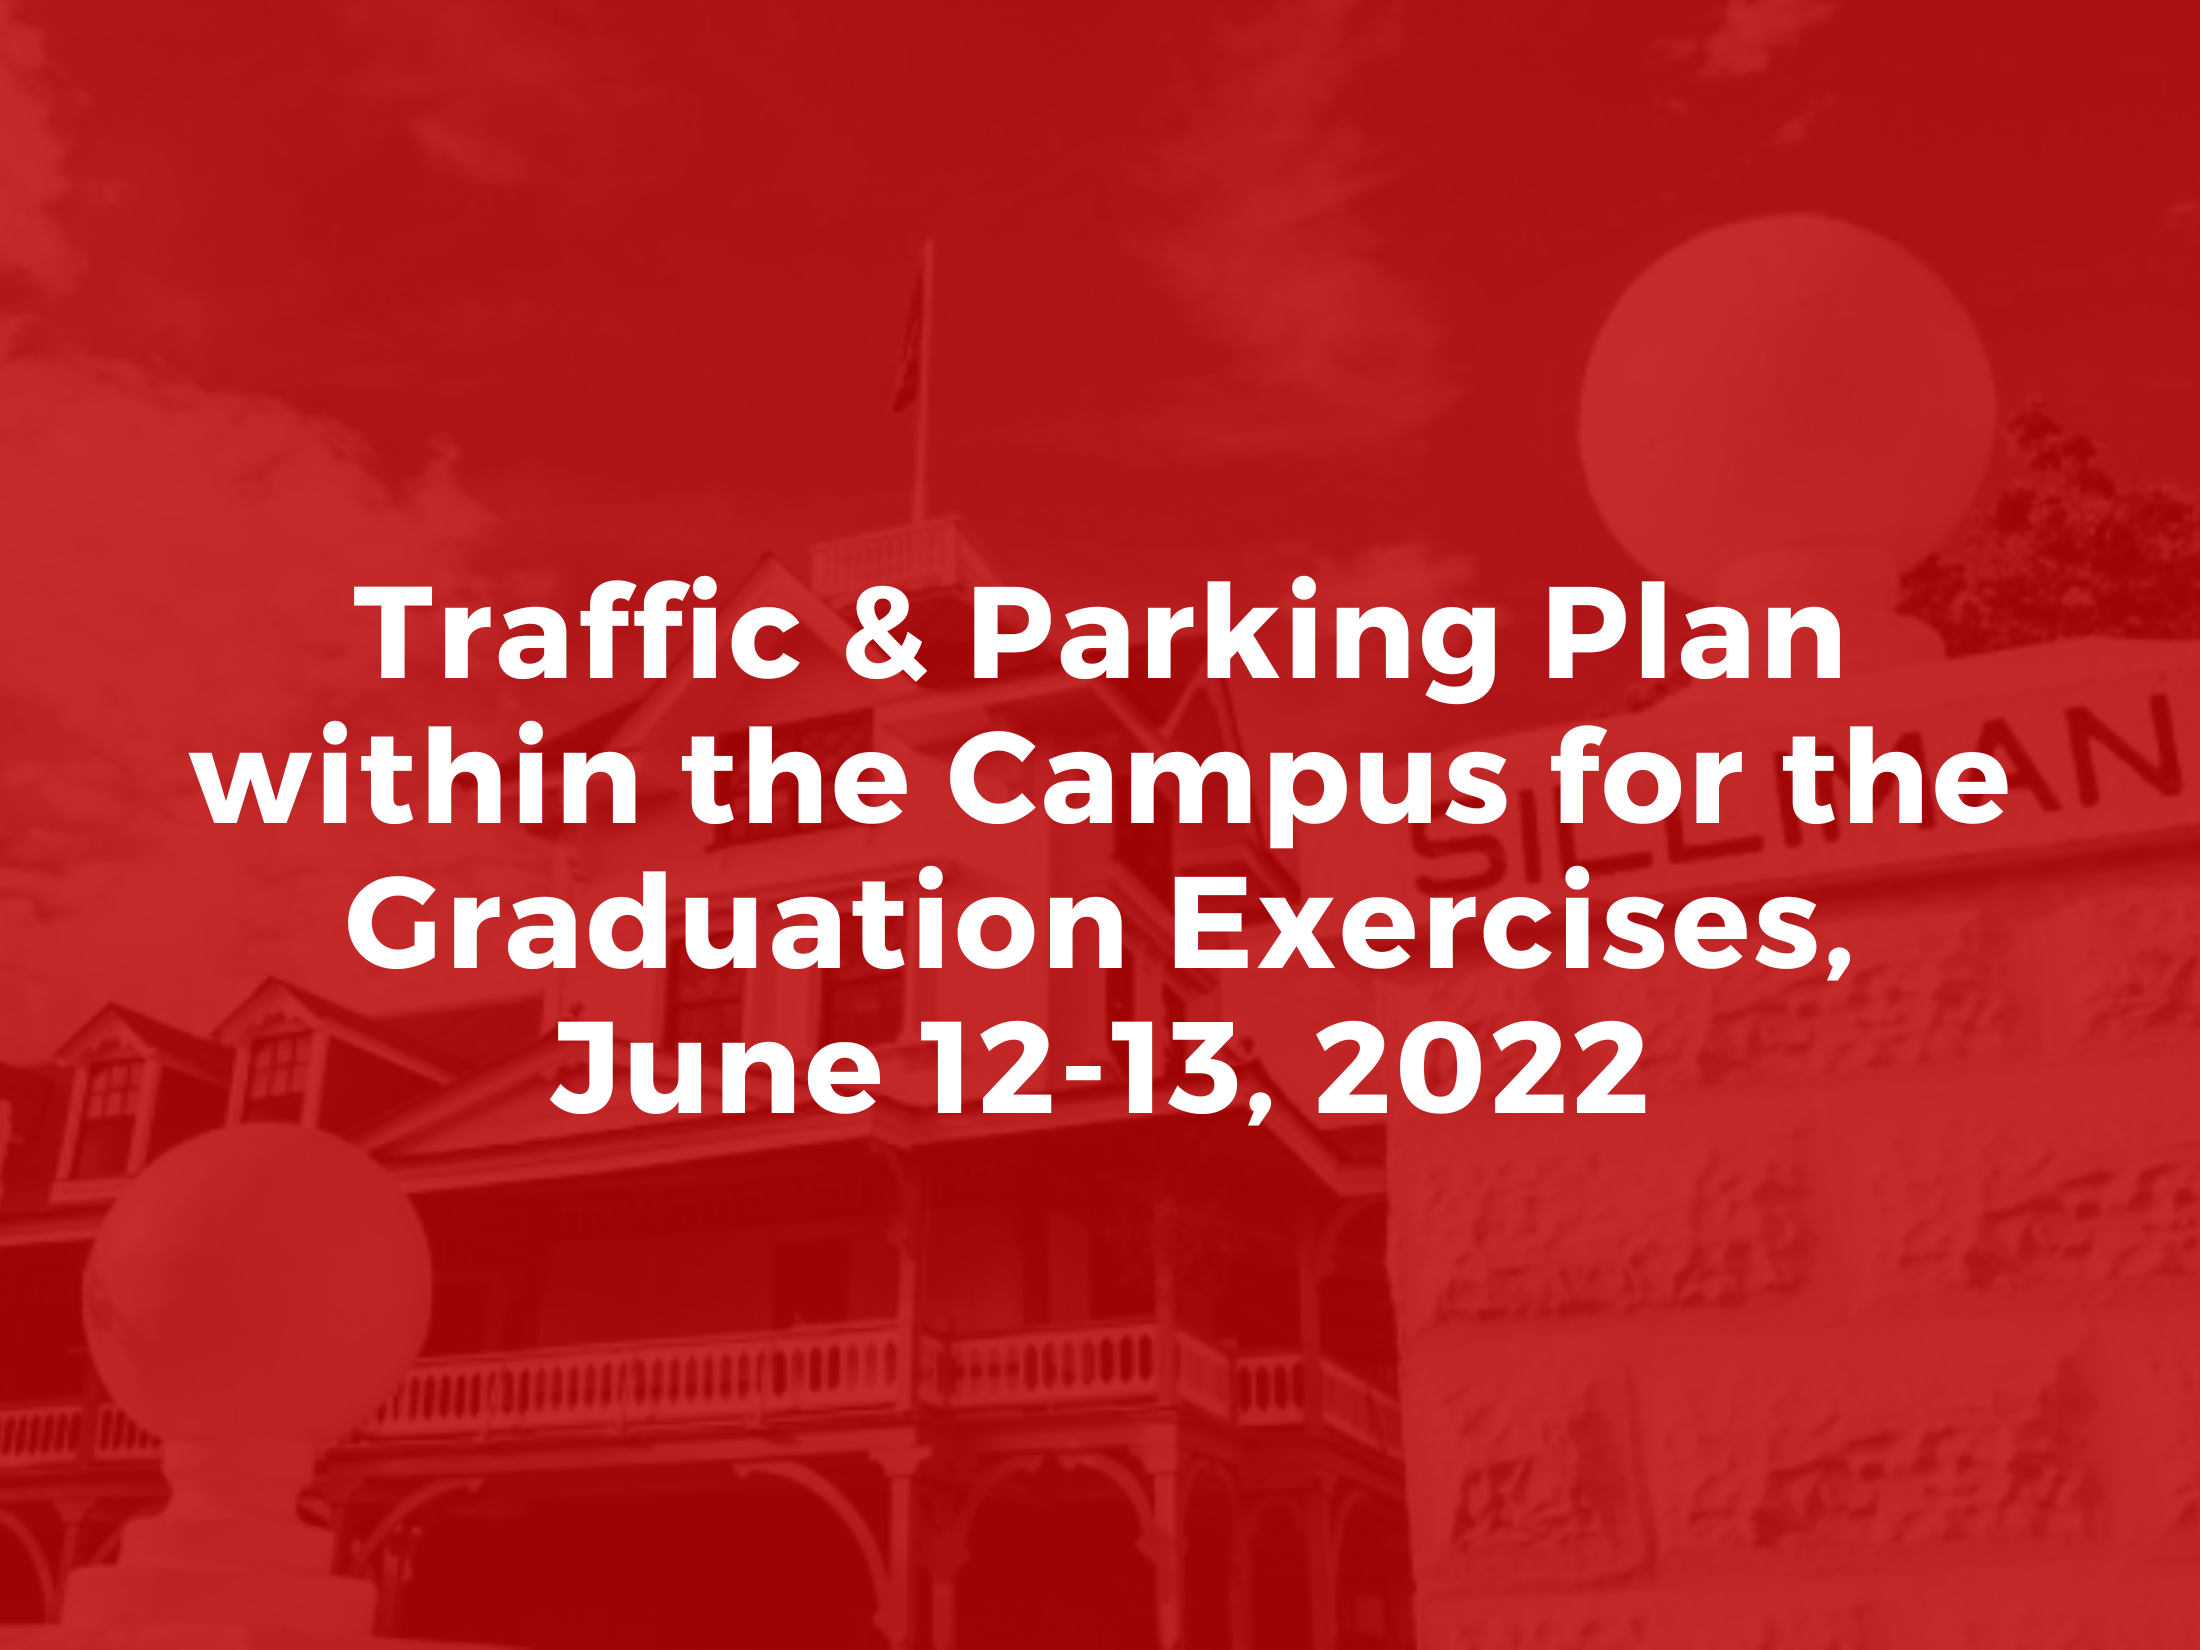 Advisory: Traffic & Parking Plan within the Campus for the Graduation Exercises, June 12-13, 2022